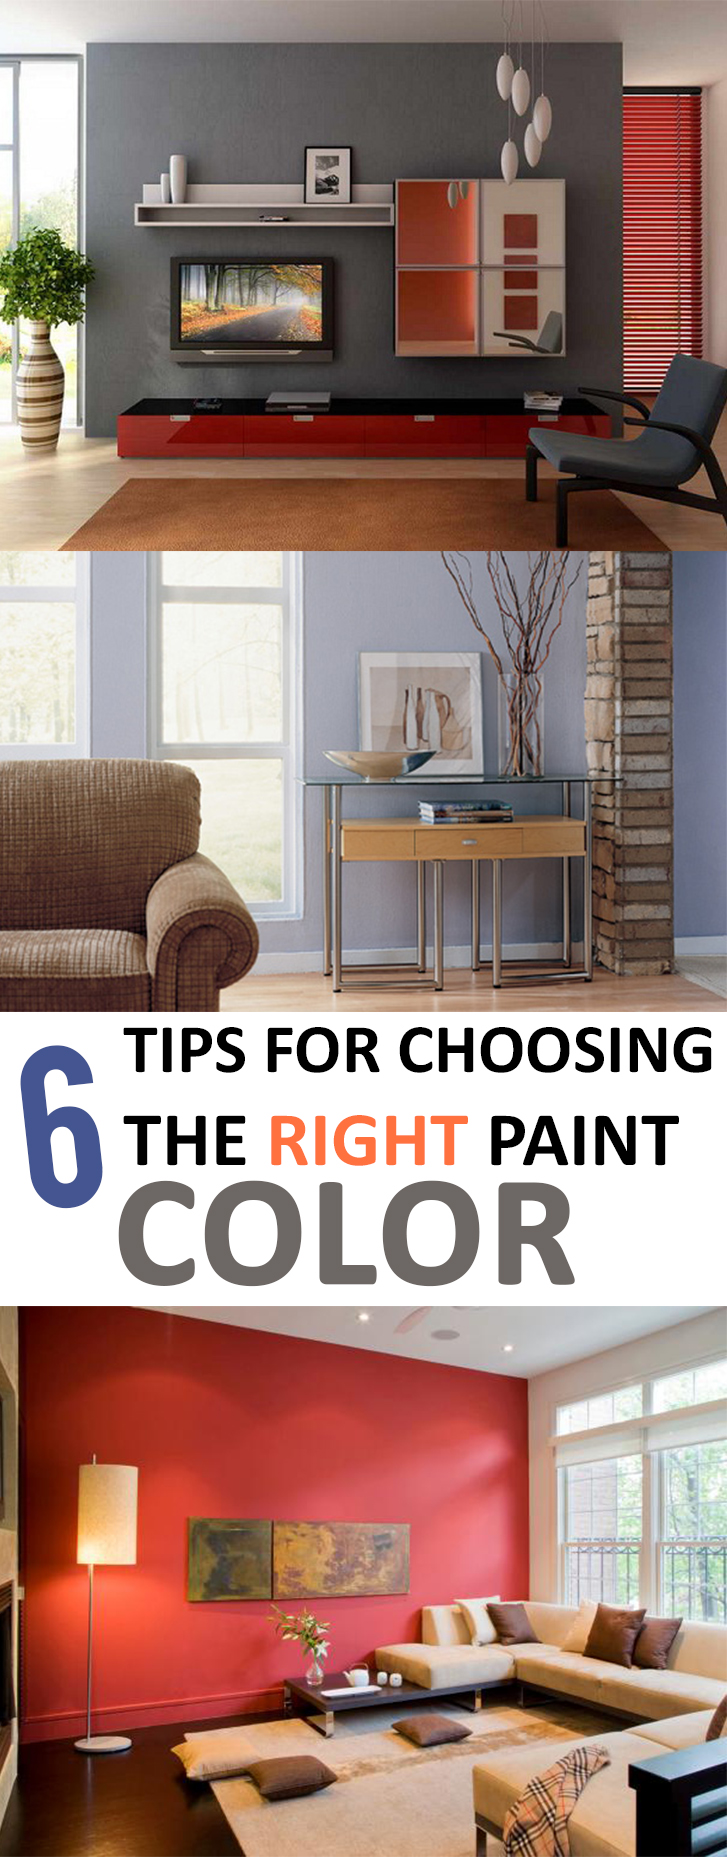 6 Tips for Choosing the Right Paint Color